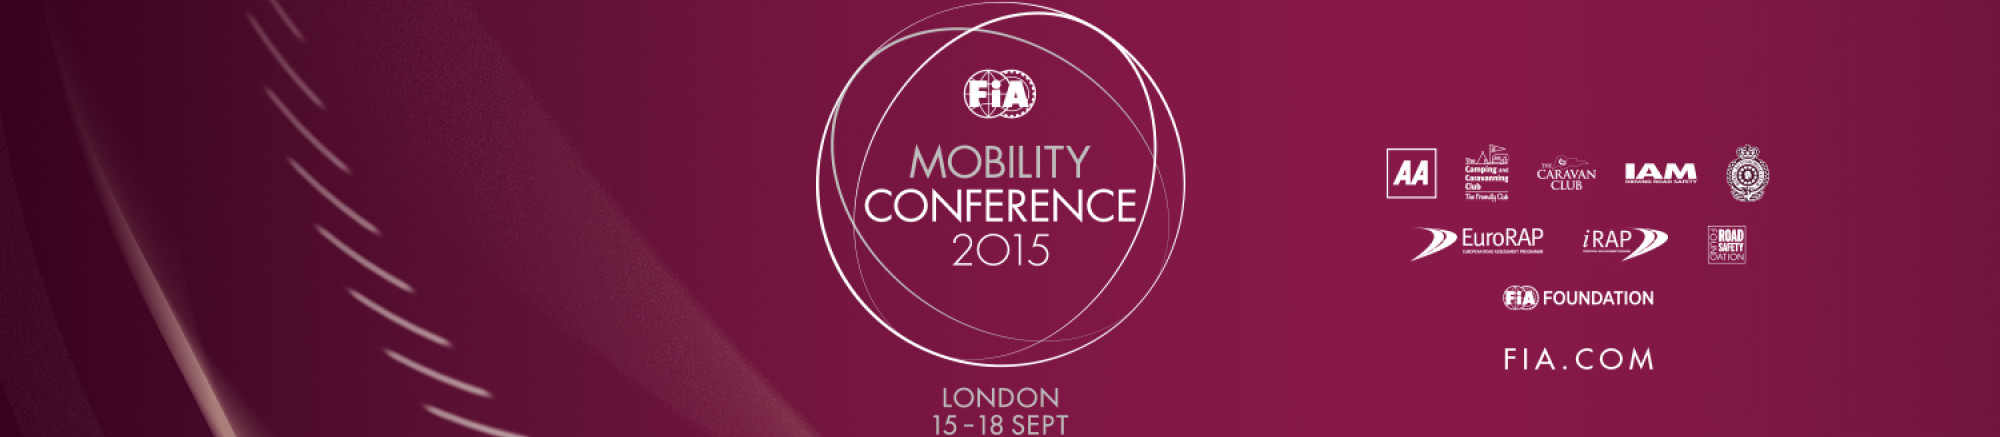 Mobility Conference 2015 banner